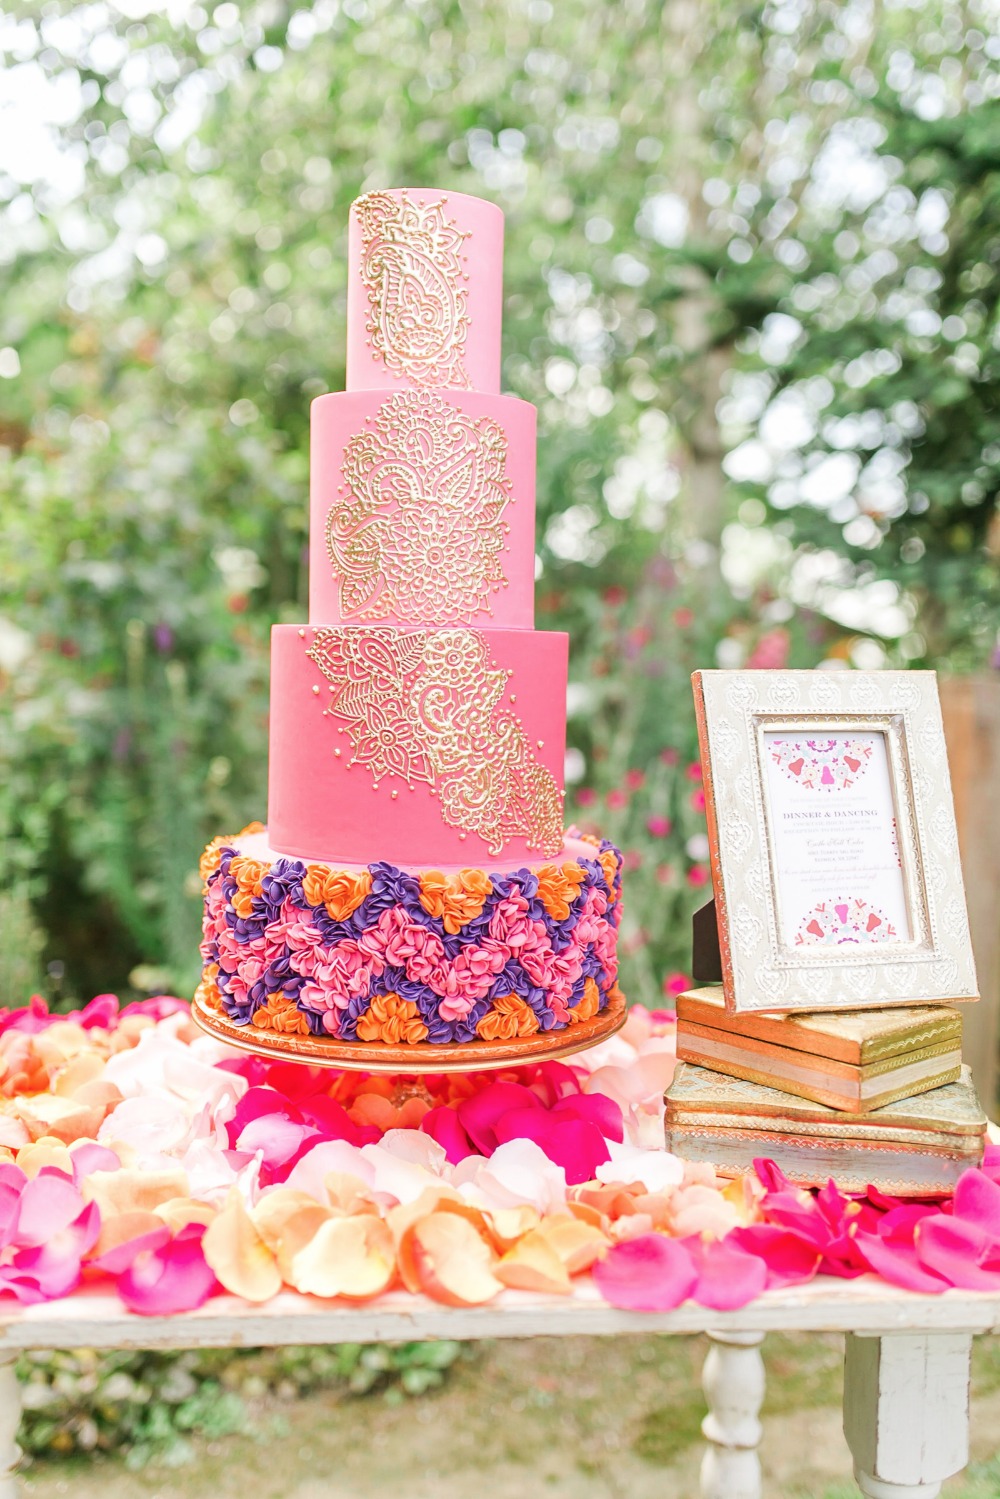 Grand four-tiered ombre fuchsia cake with intricate henna piping